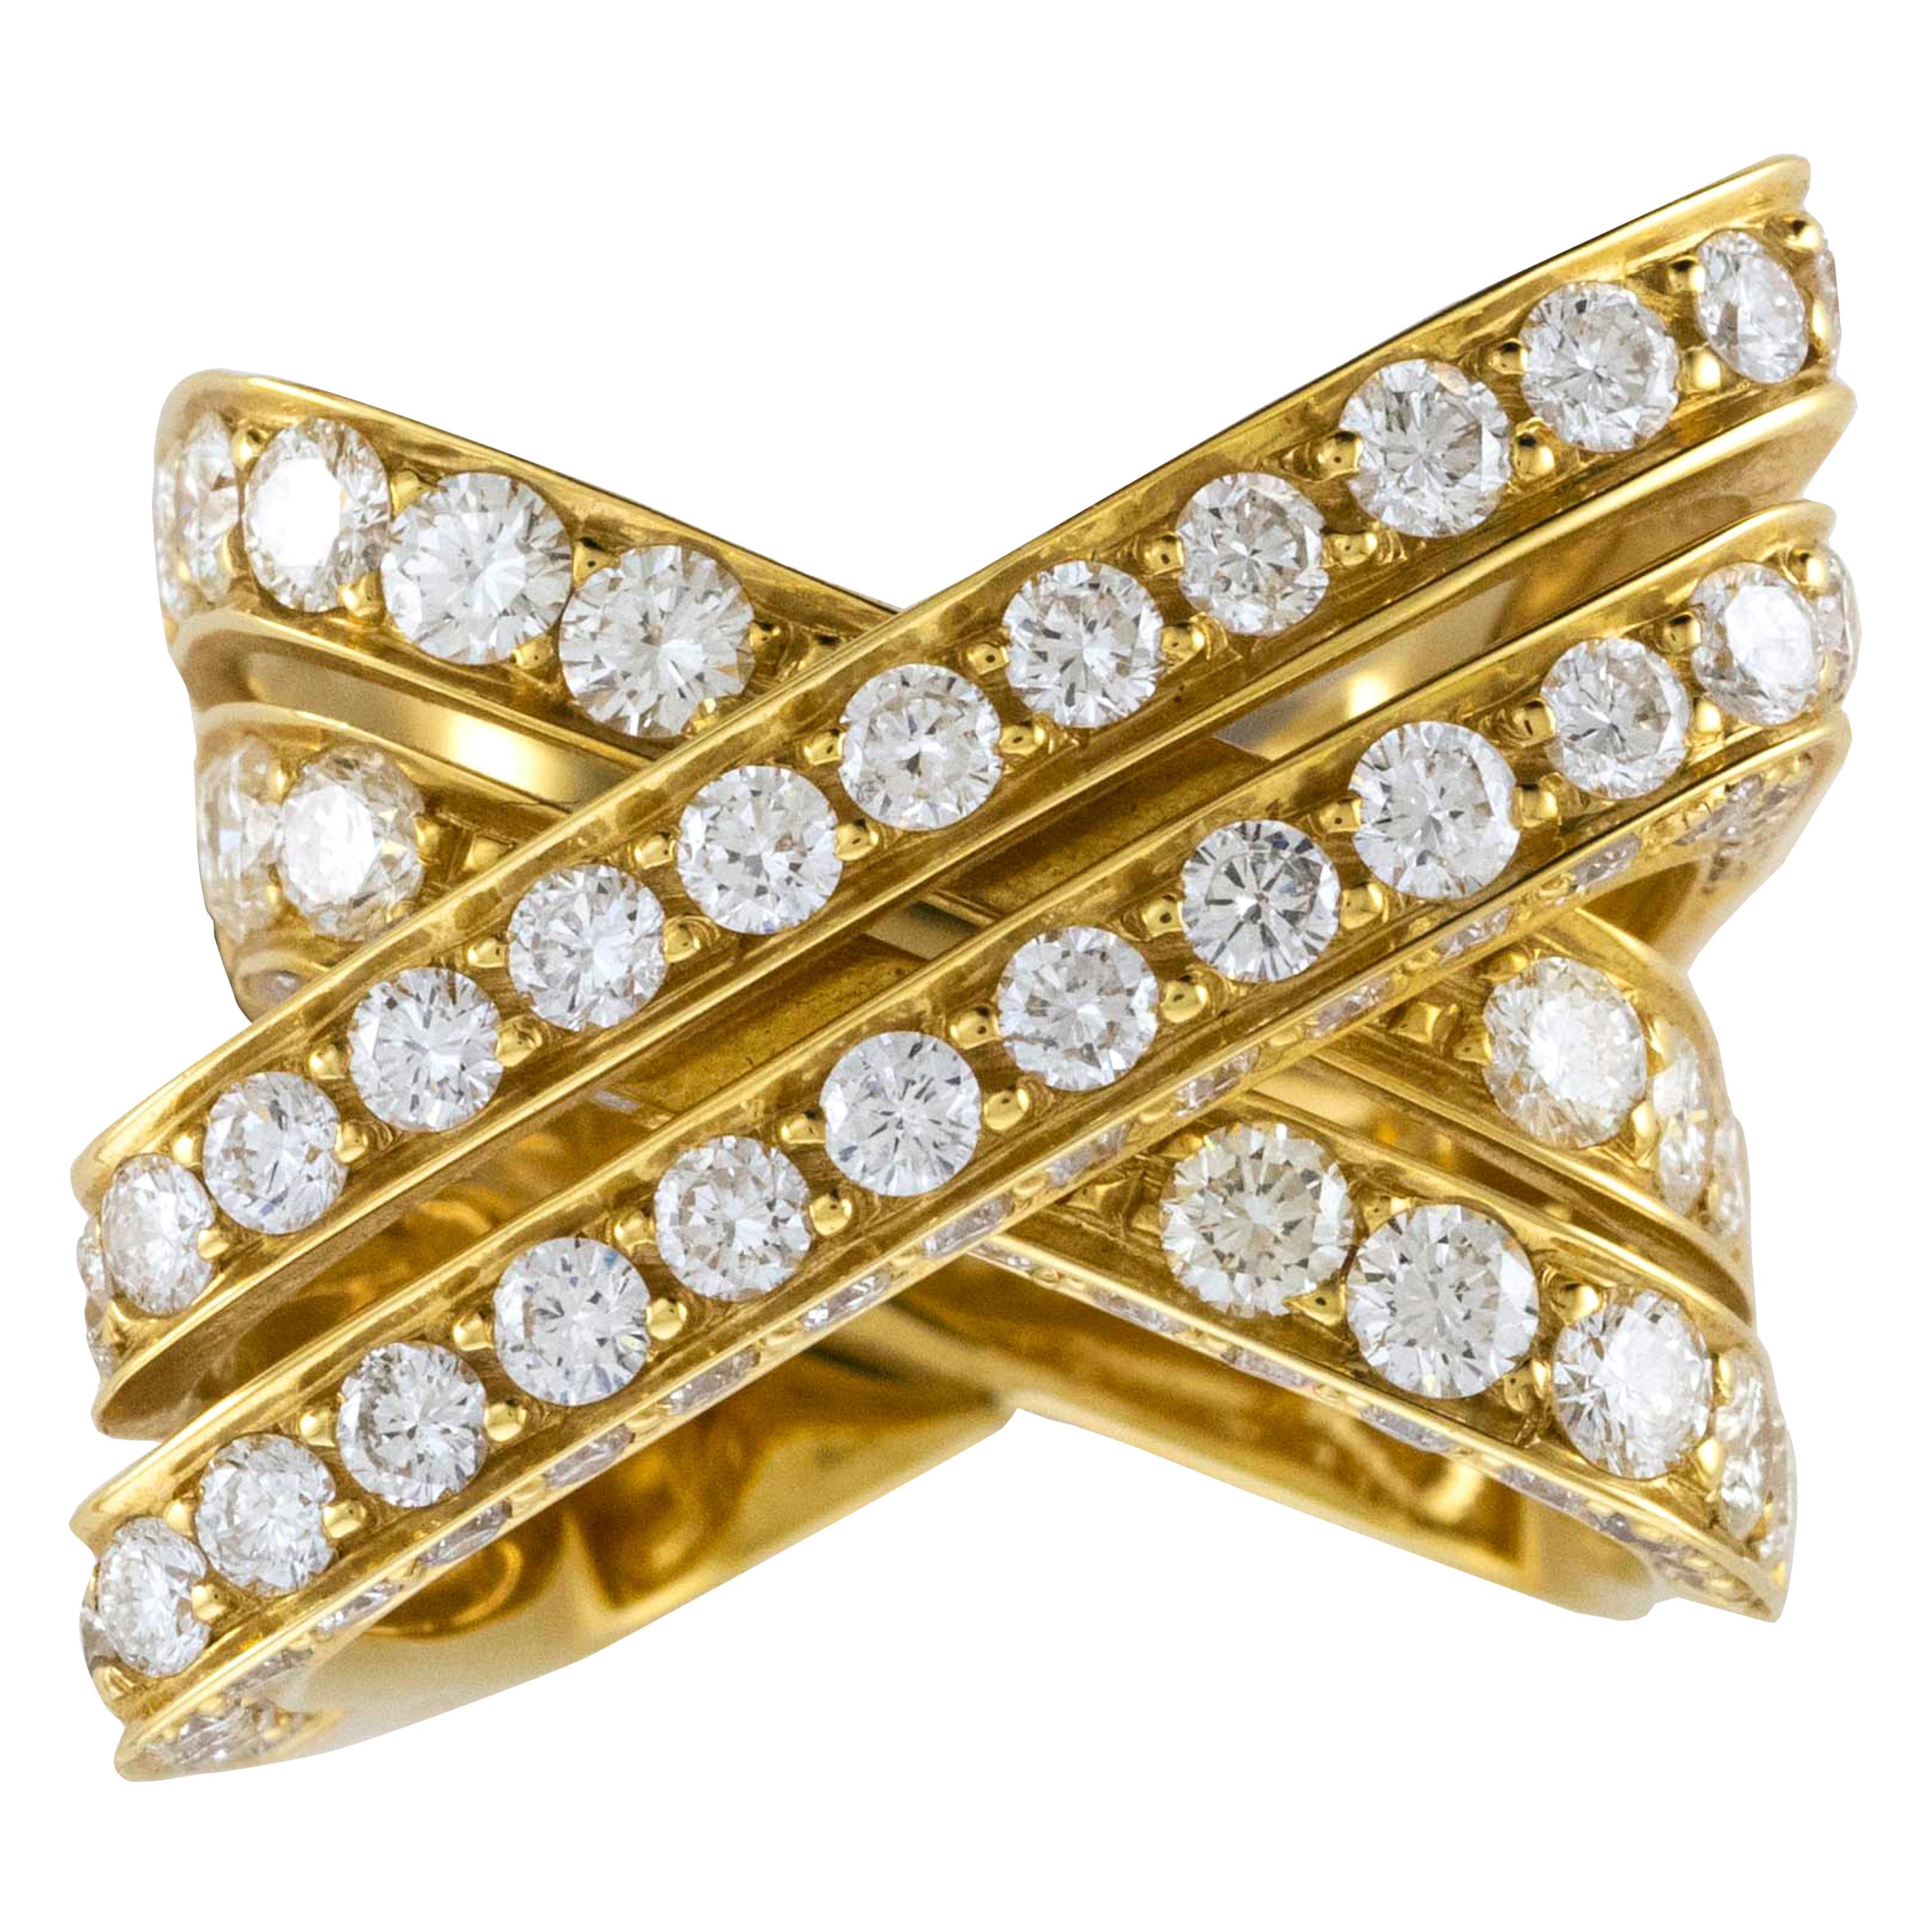 Solid 18 Kt yellow gold cocktail ring weighing gr.19.70.
A very fine knot shaped braid embellished with diamonds weighing in total ct 3.89.
Made in Italy.
Size 7. Not sizable.
Accompanied by appraisal document.


